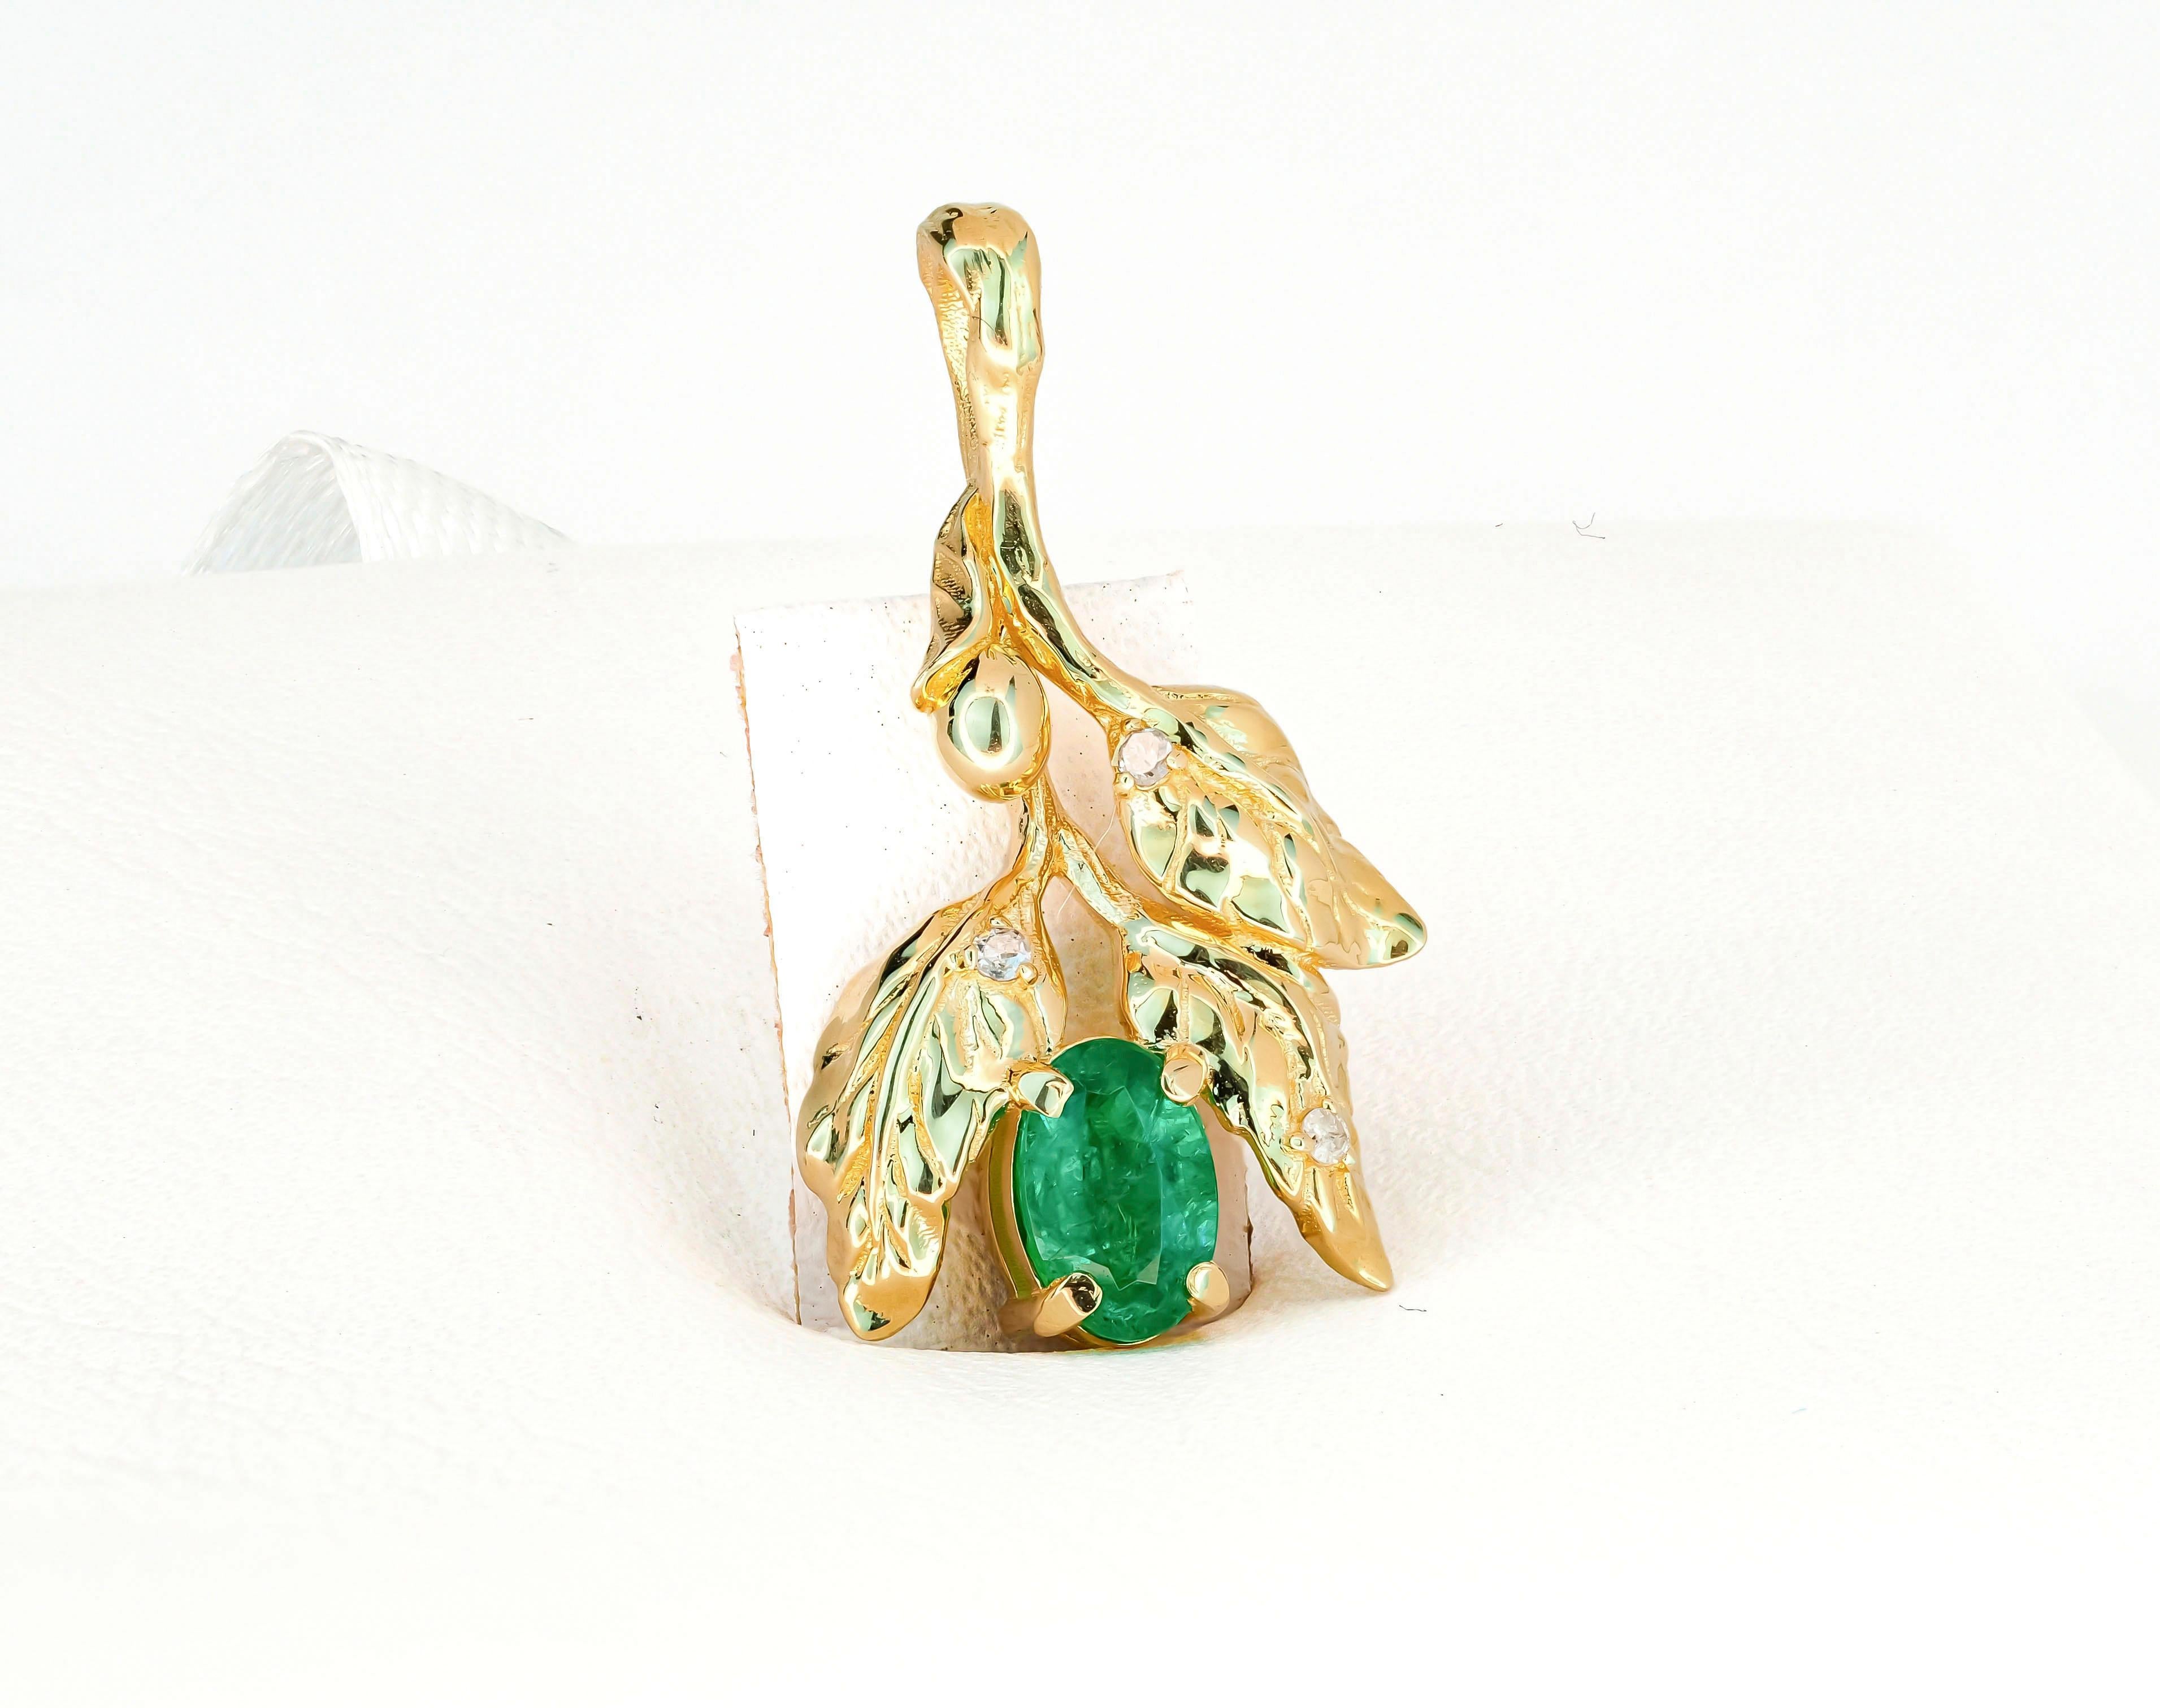 14k  gold olive pendant with natural emerald and diamonds. 
May birthstone.
Metal: 14kt solid gold
Pendant size: 23.3 x1 3.7 mm.
Weight: 2.4 g.

Gemstones:
Natural emeralds: 1 piece, weight - approx 0.70 ct.
Oval cut, green color,